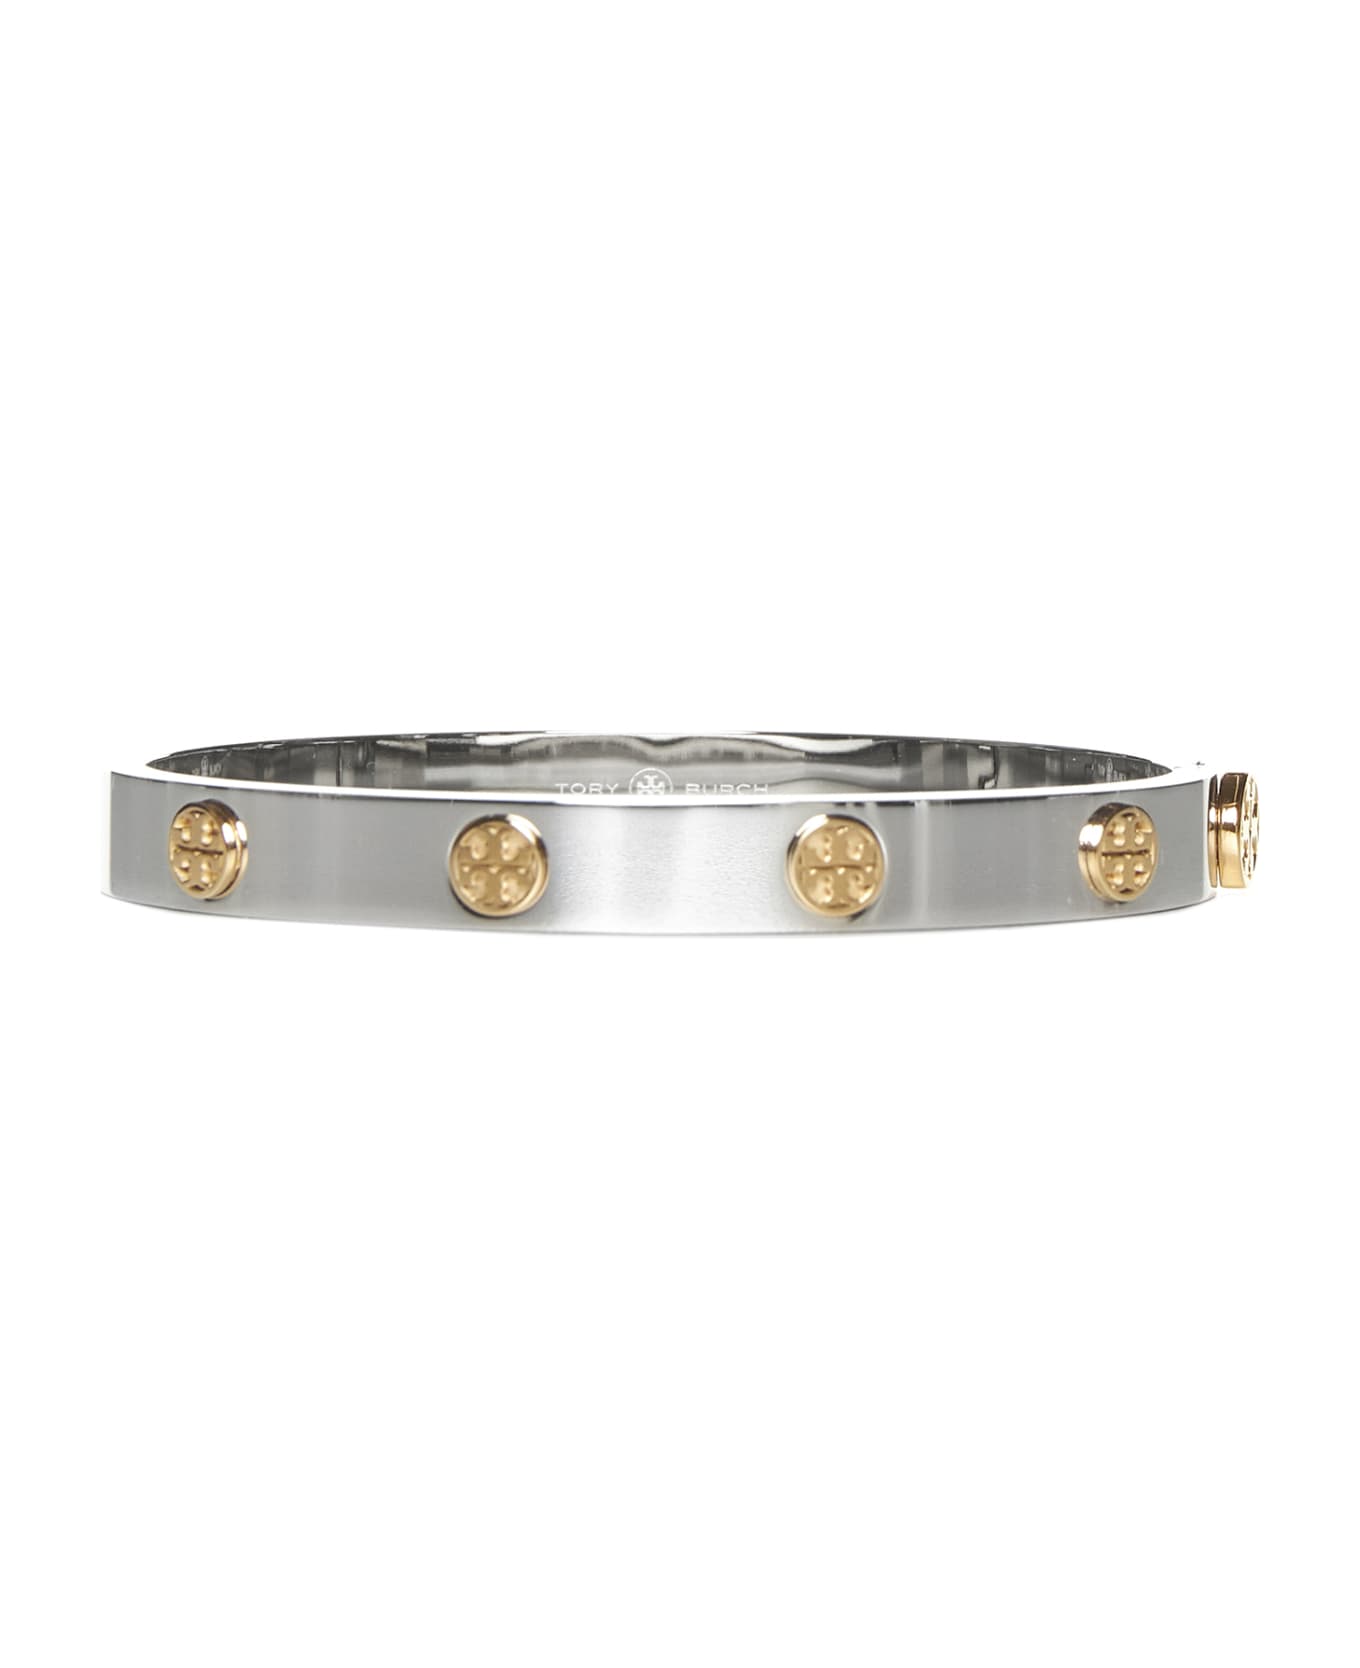 Tory Burch Steel Bracelet With Contrasting Logo - Tory silver / tory g